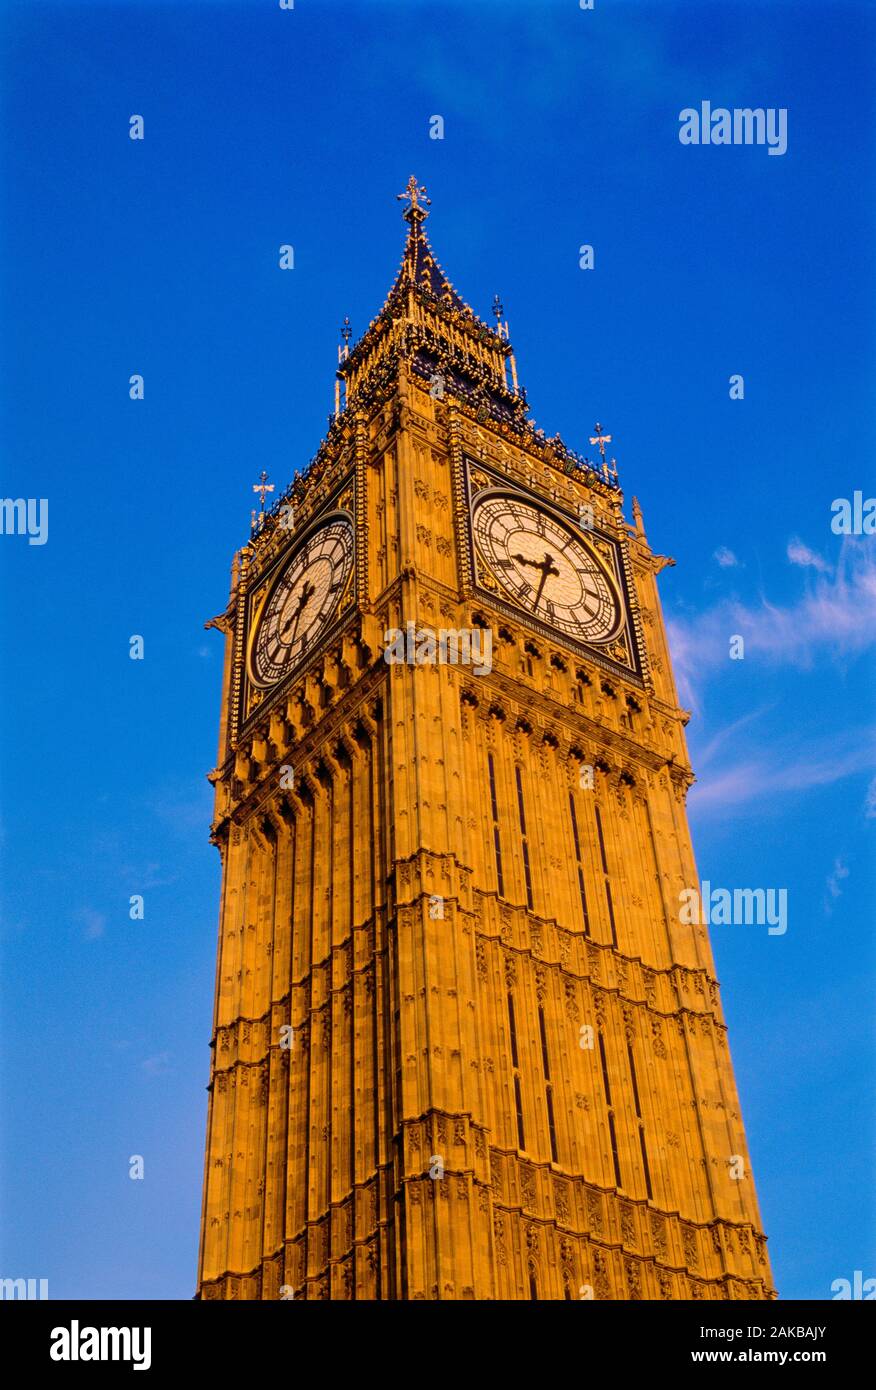 Low angle view of Big Ben, London, England, UK Banque D'Images